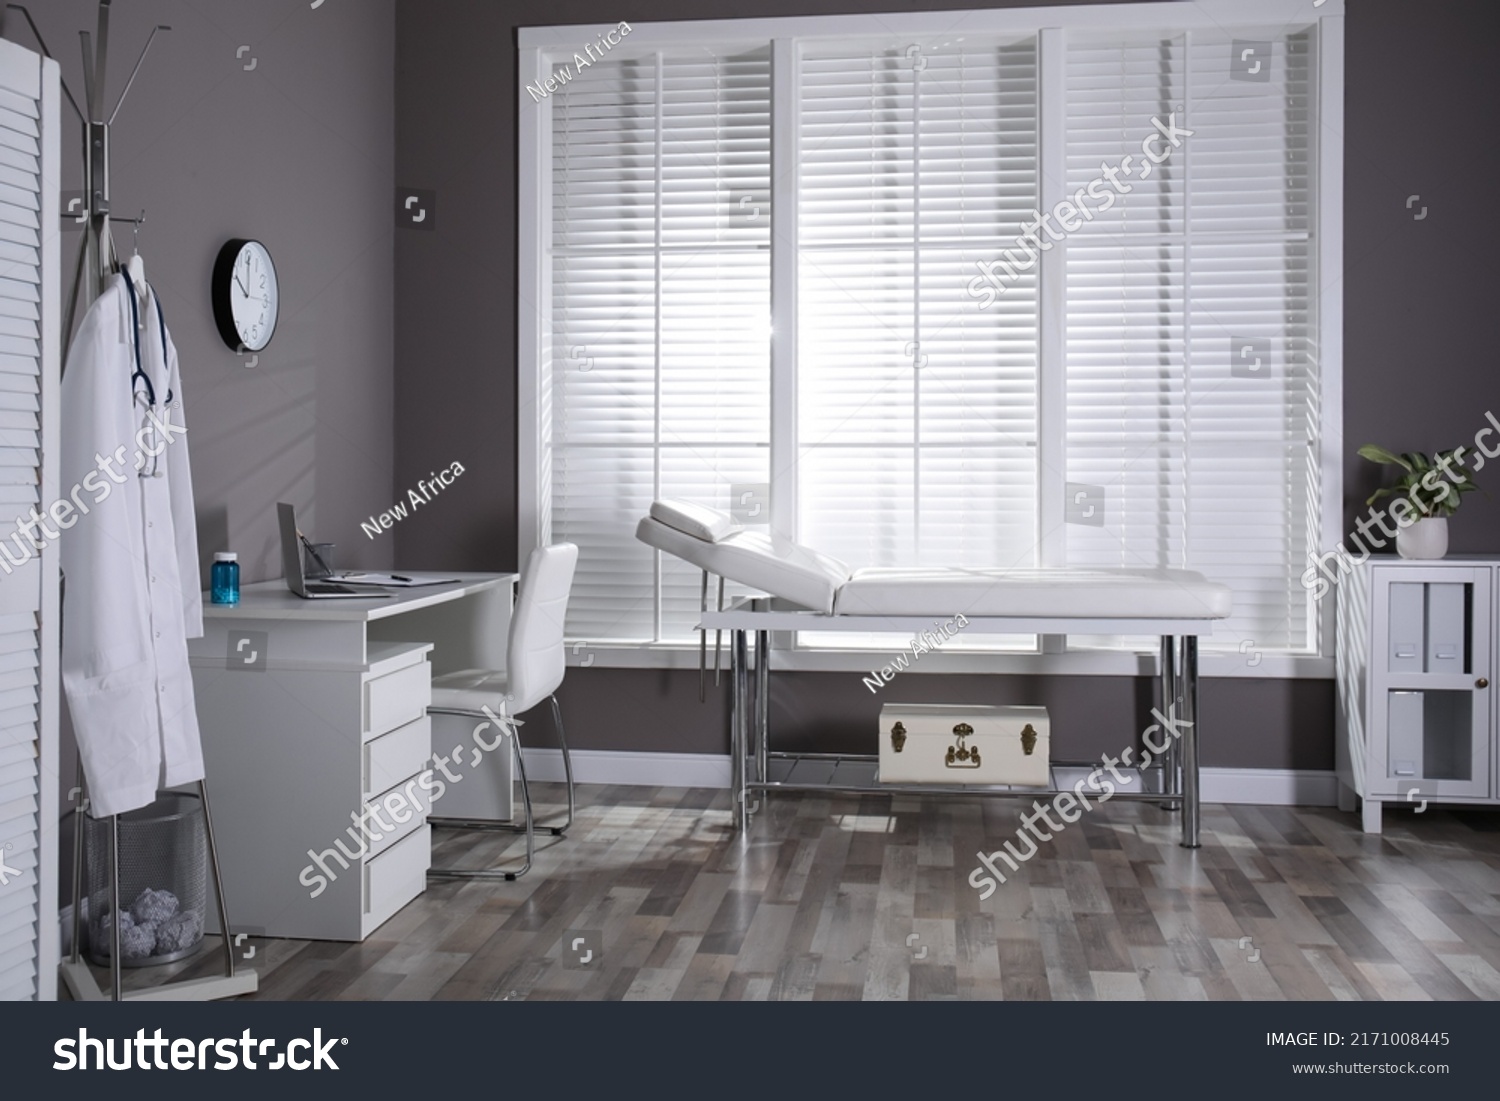 Modern medical office interior with doctor's workplace and examination table #2171008445